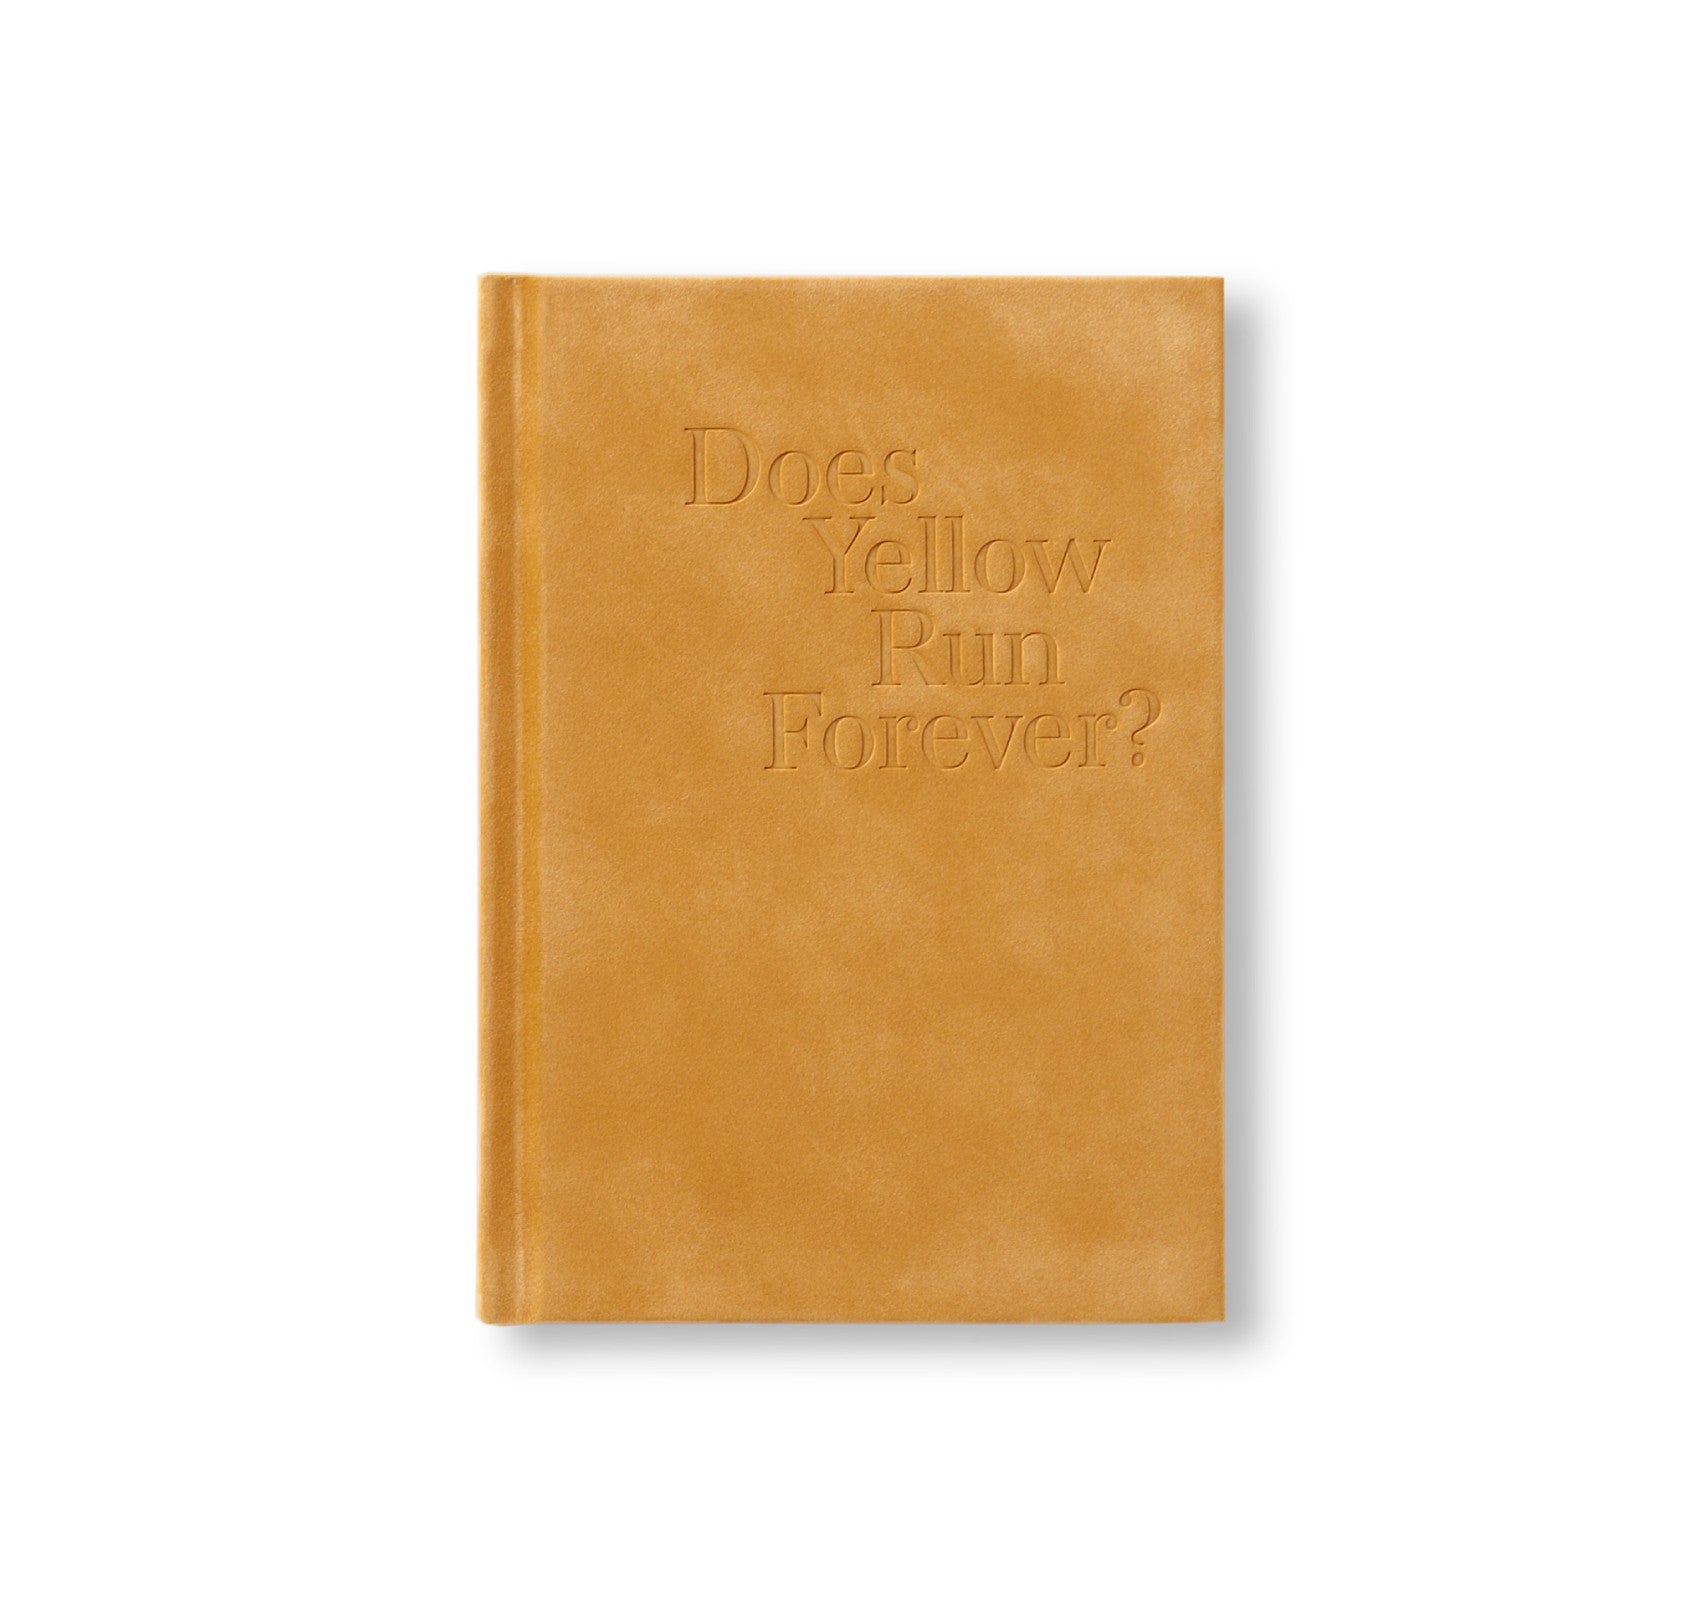 DOES YELLOW RUN FOREVER? by Paul Graham [SIGNED]